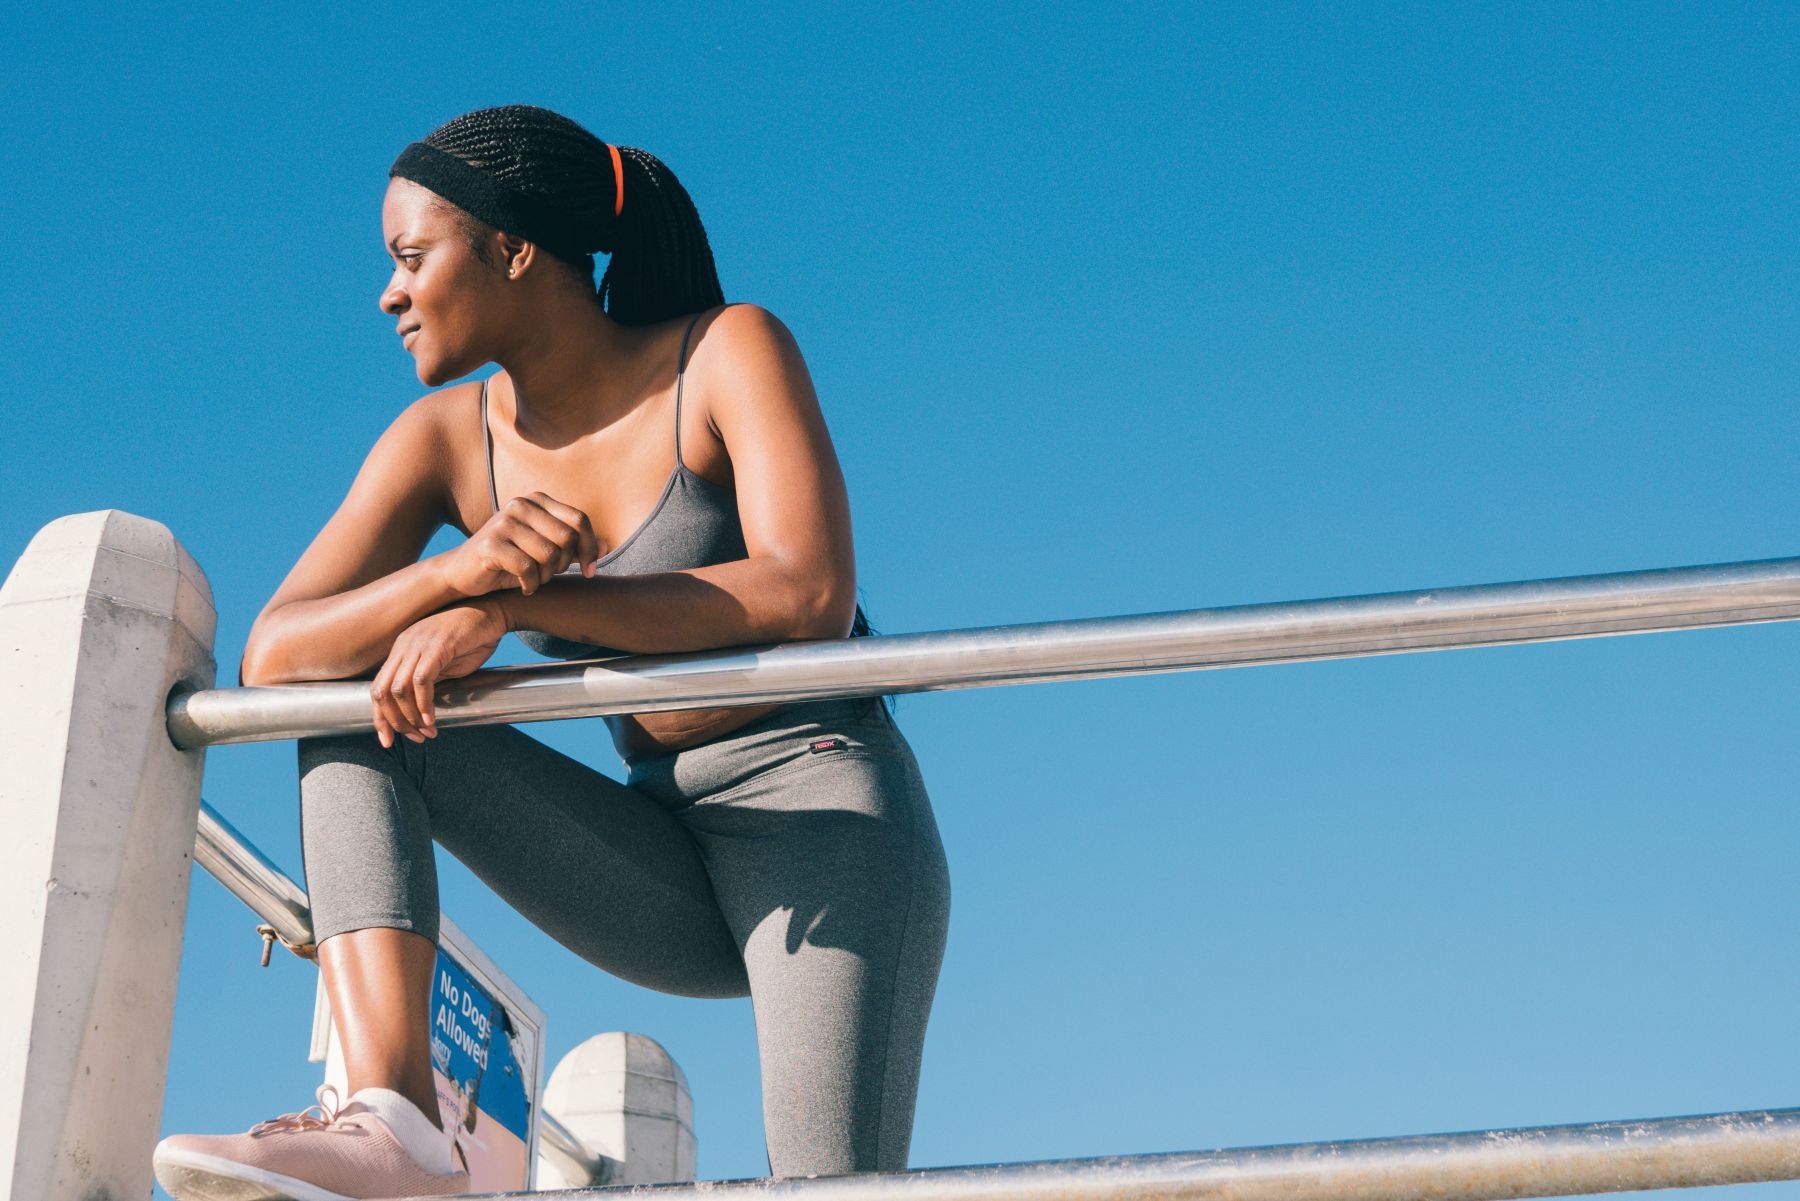 Sticking to Your Guns When It Comes to Your Health and Wellness Goals